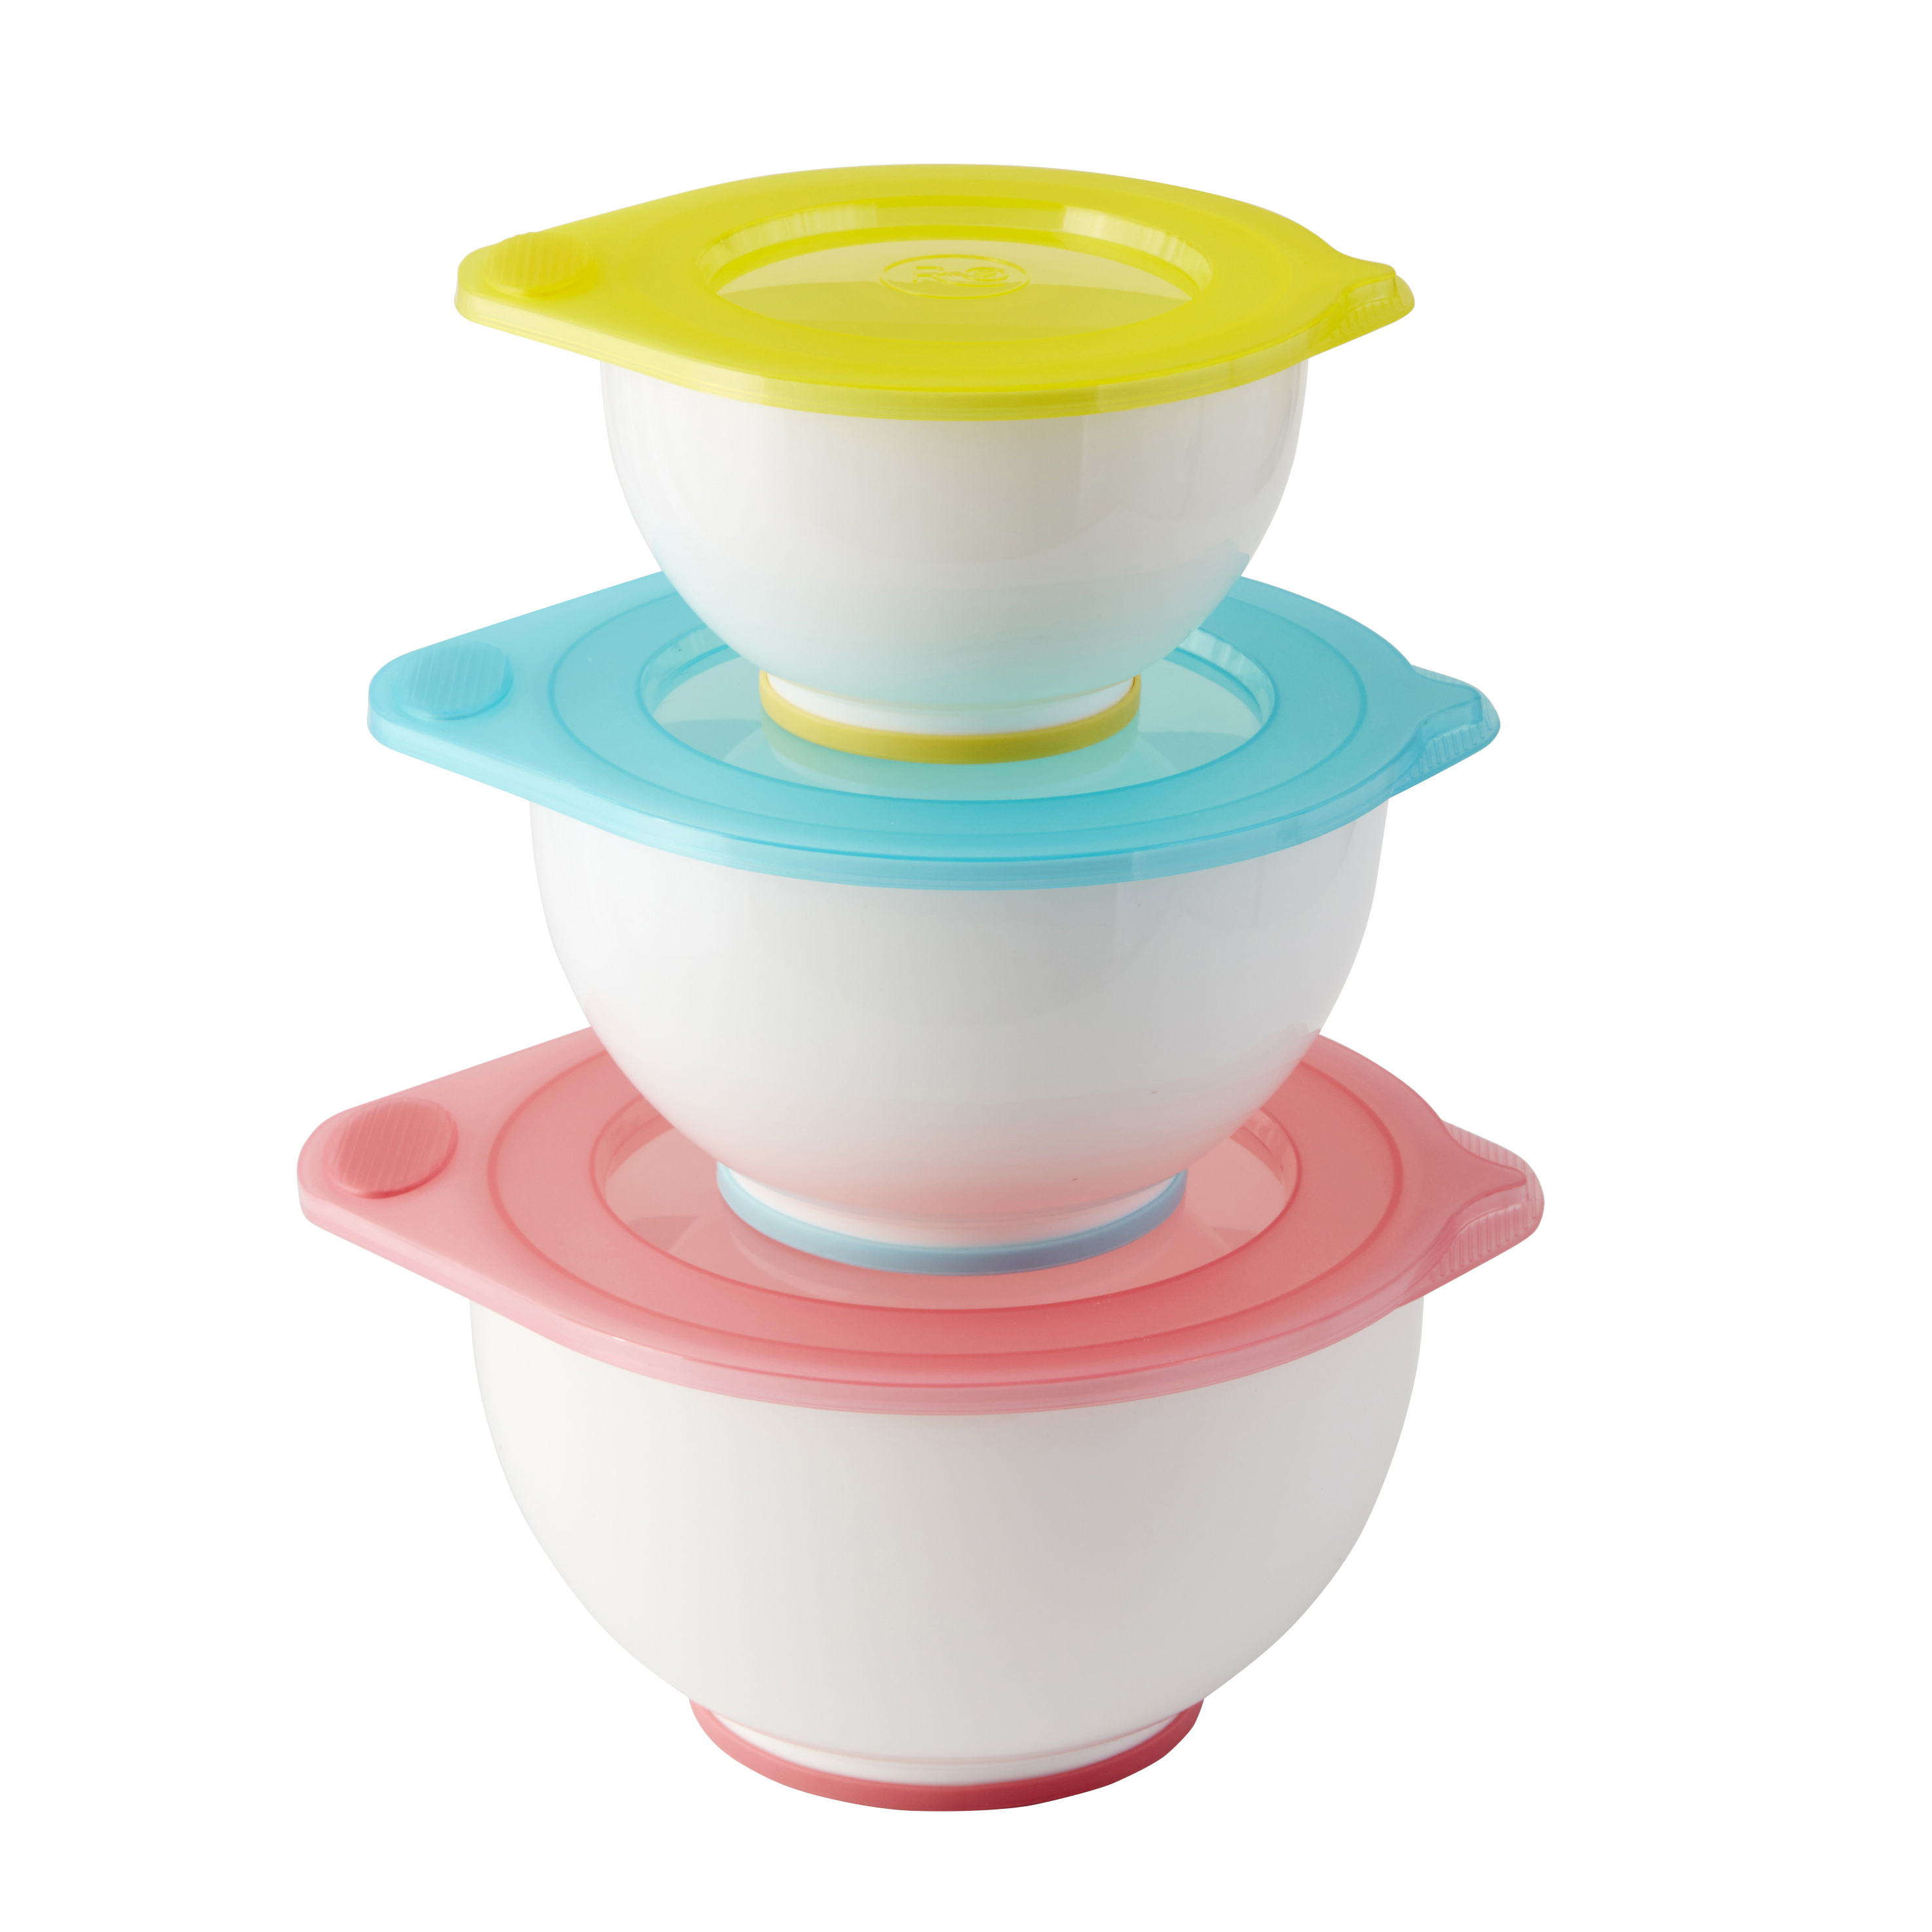 ROSANNA PANSINO by Wilton Mixing Bowl with Lids Set, 6-Piece - image 1 of 13